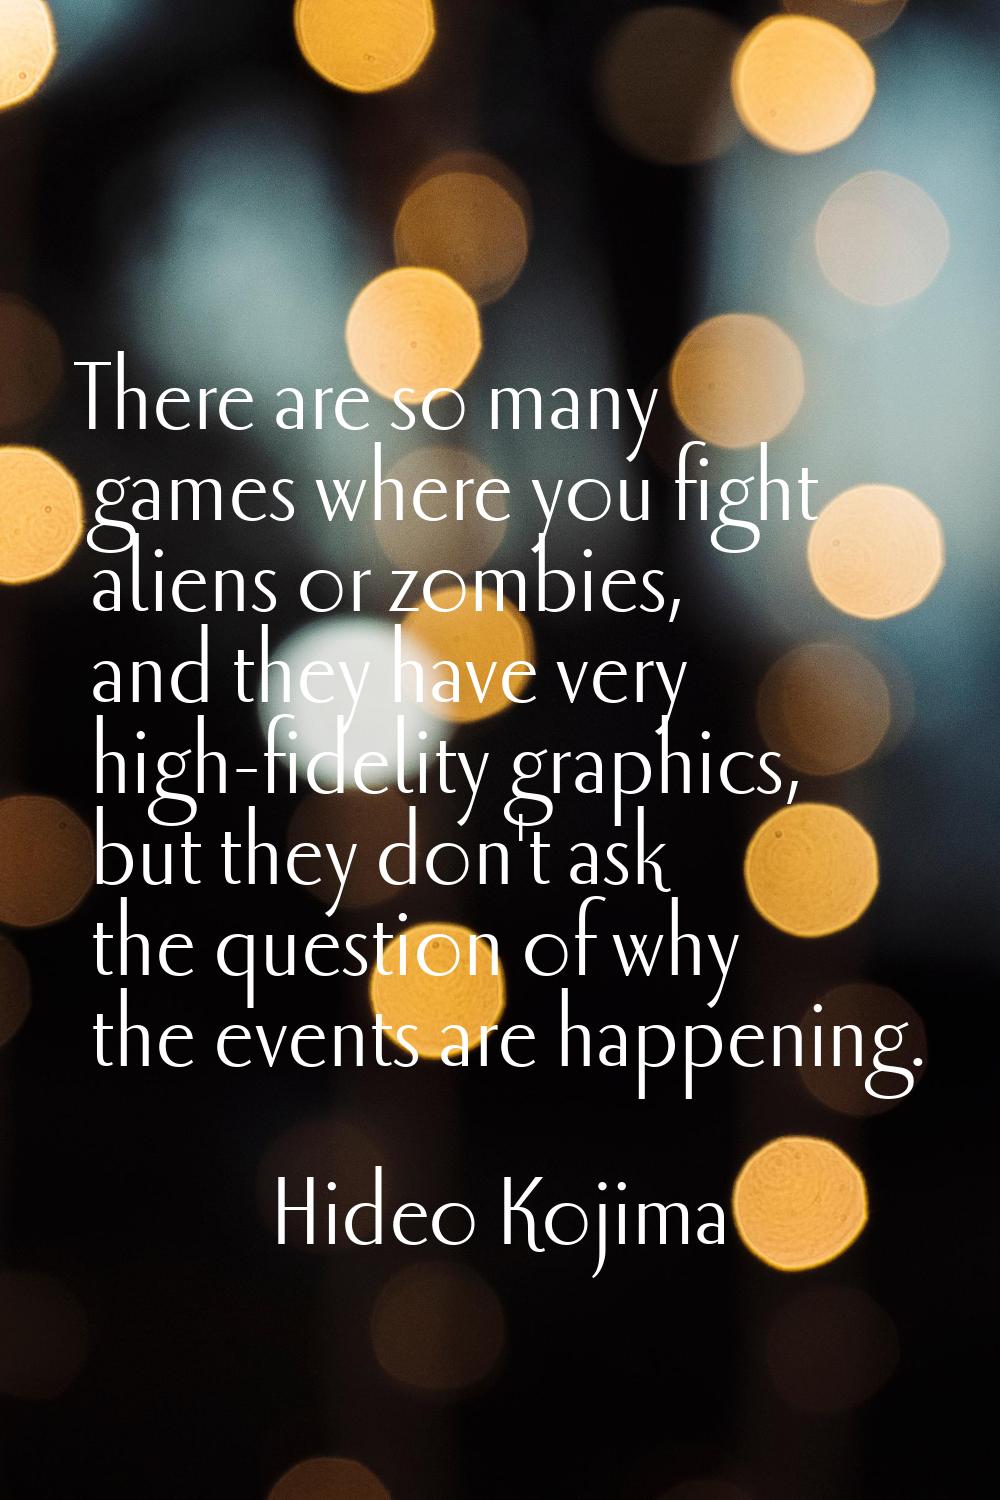 There are so many games where you fight aliens or zombies, and they have very high-fidelity graphic